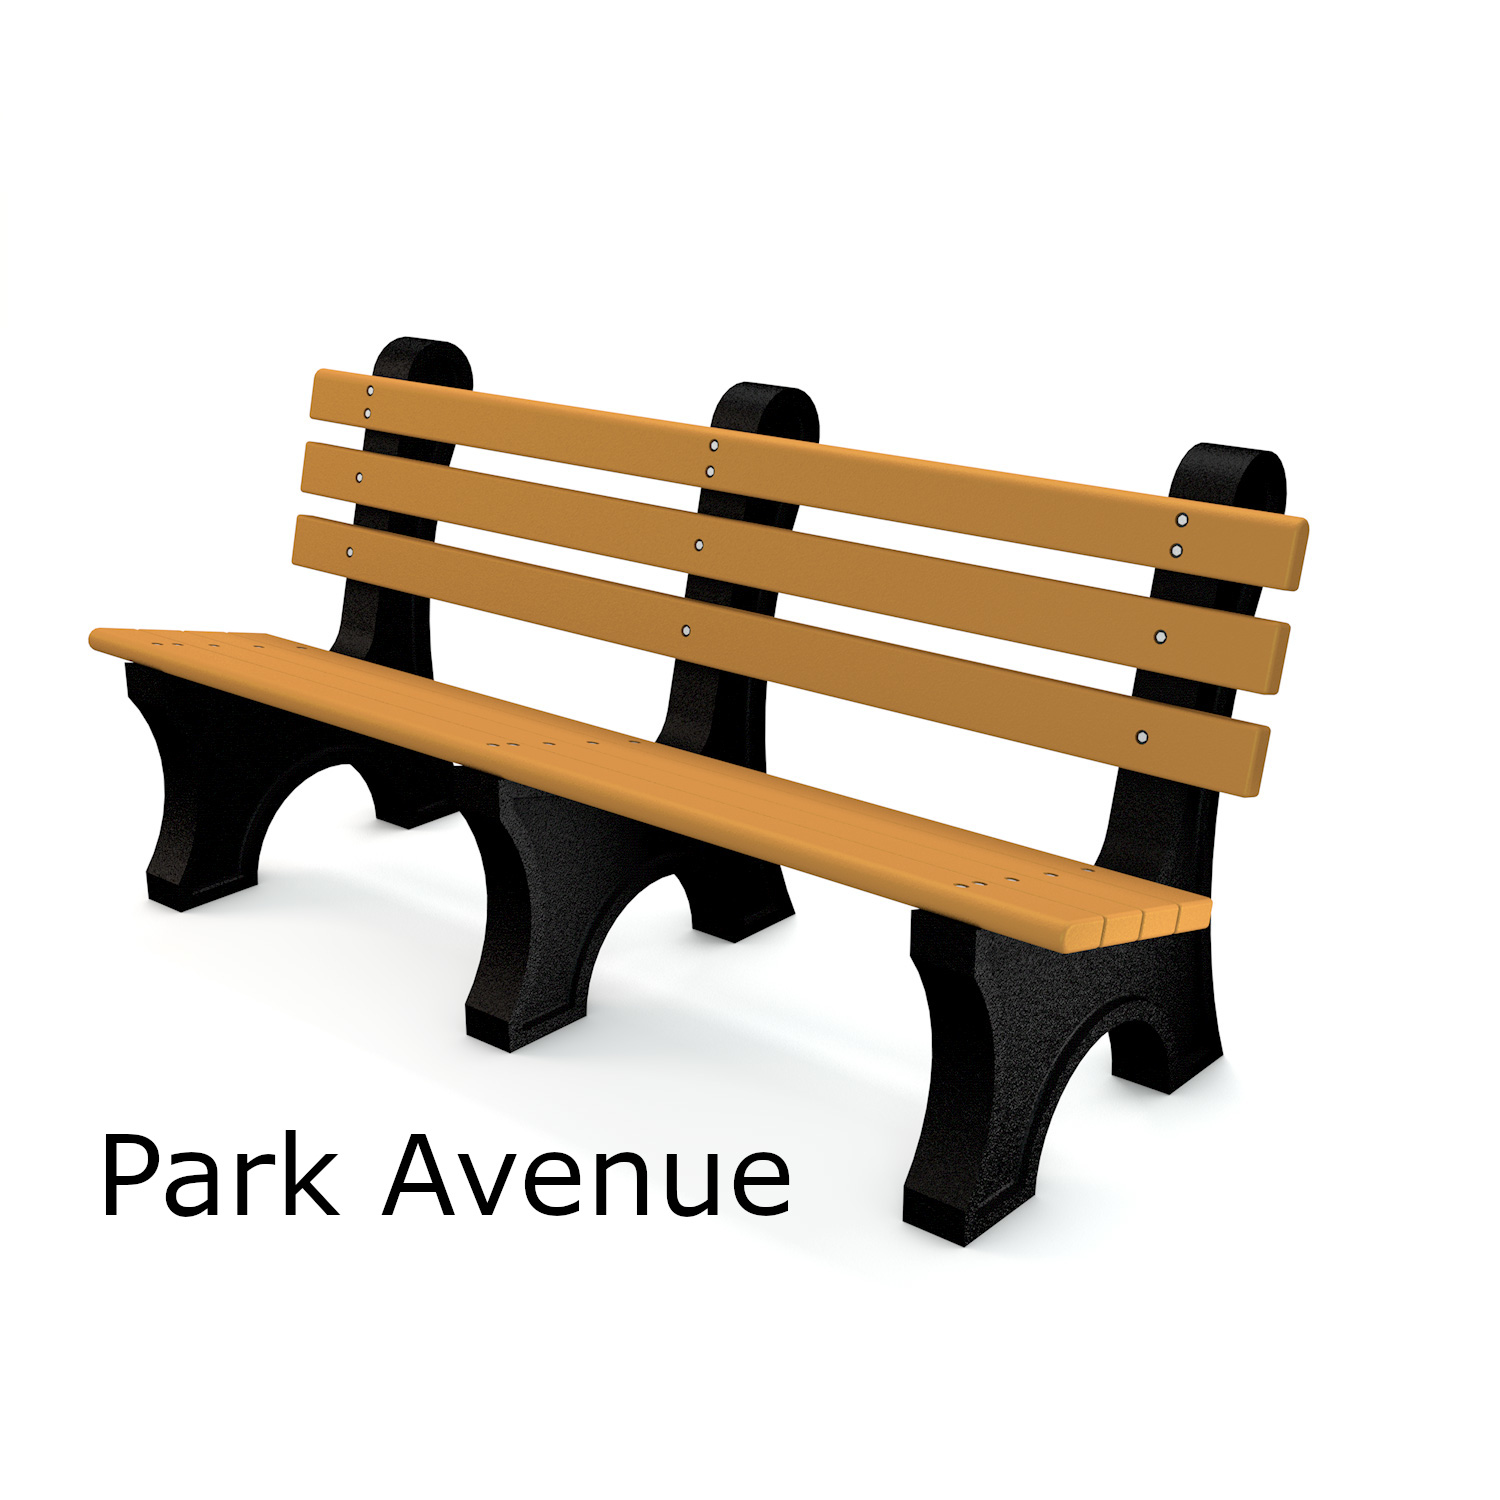 Comfort Park Avenue Recycled Plastic Lumber Park Bench